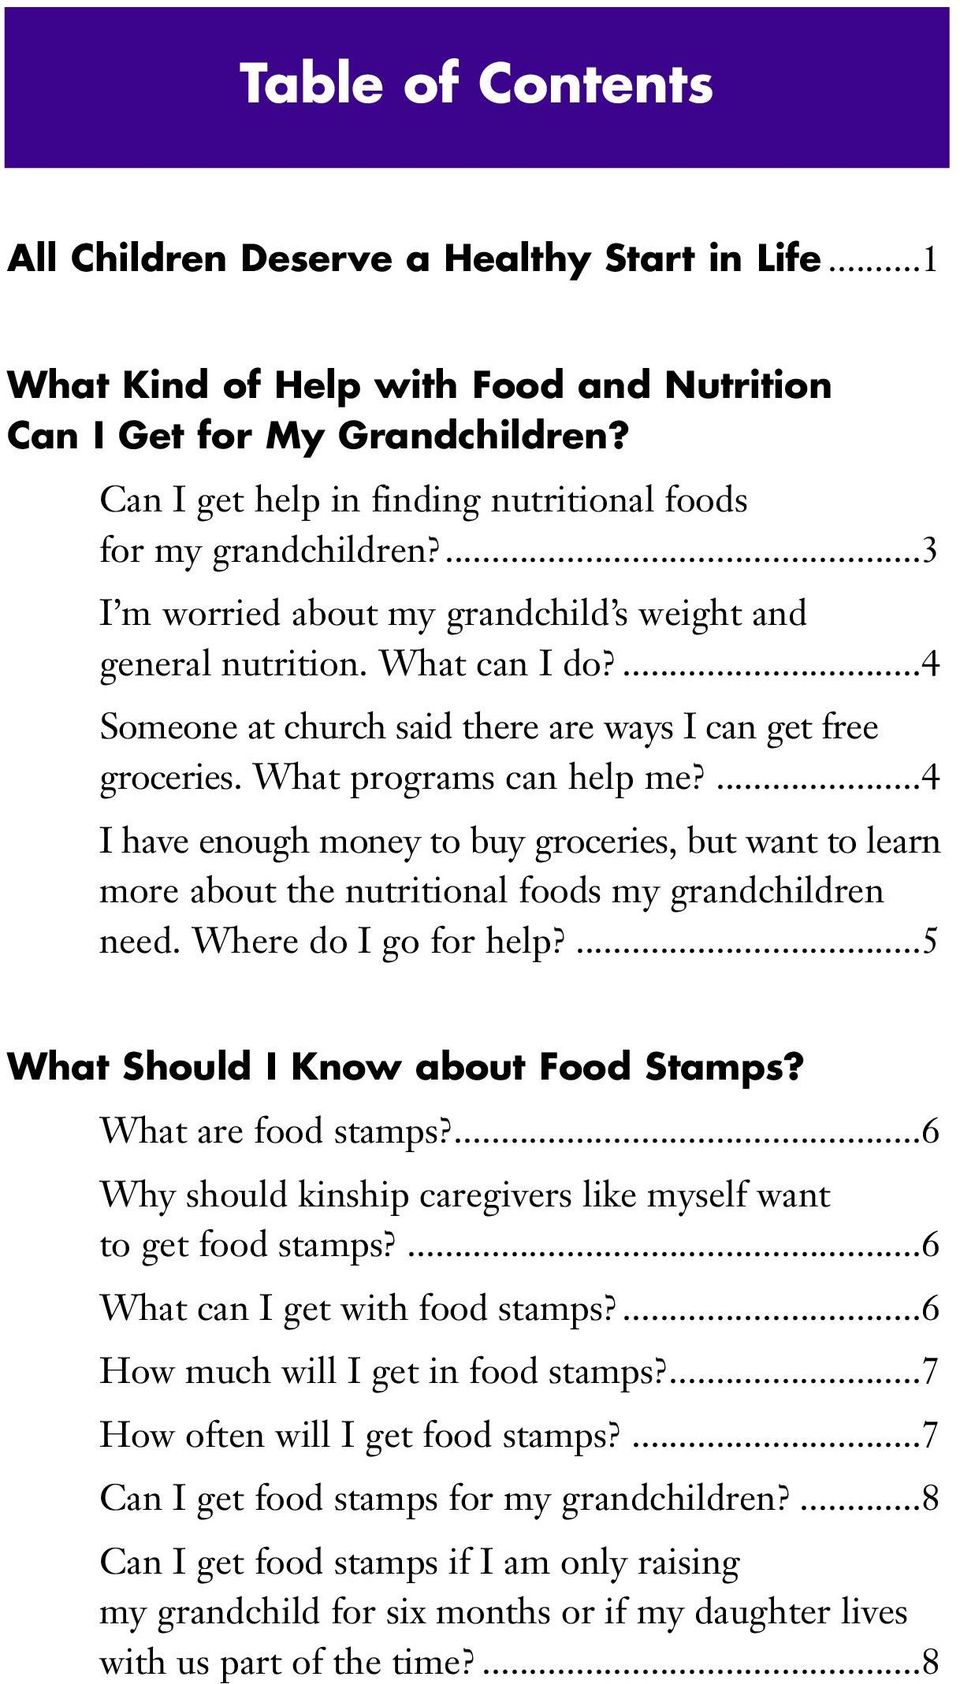 ...4 Someone at church said there are ways I can get free groceries. What programs can help me?